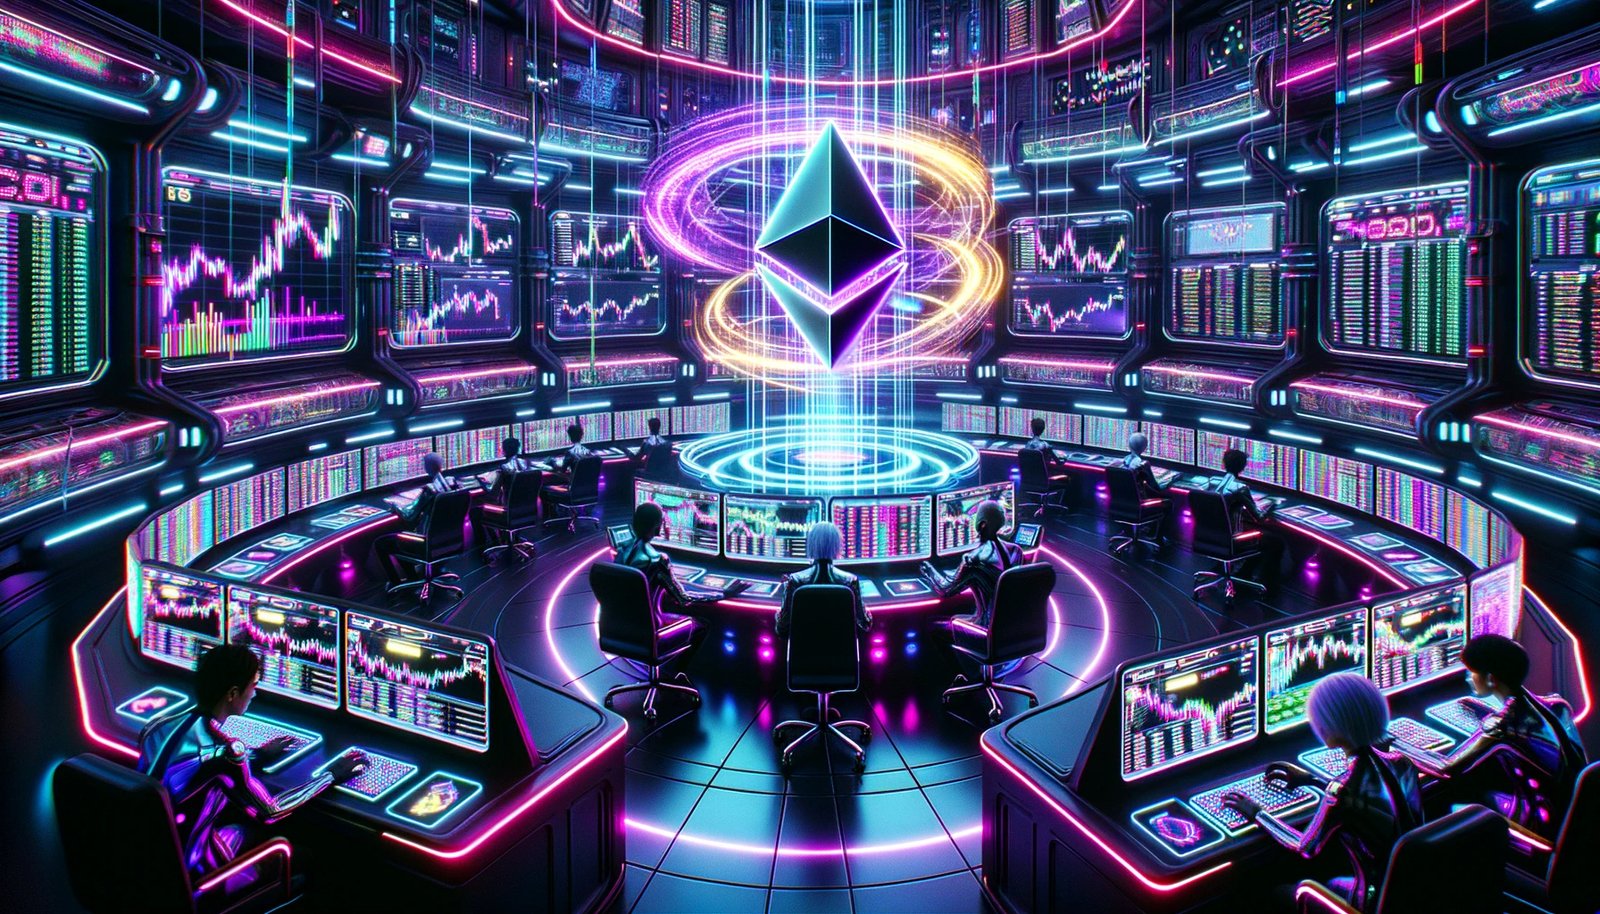 Ethereum Price Prediction as Market Cap Hits $200 Billion: What’s Next for ETH?